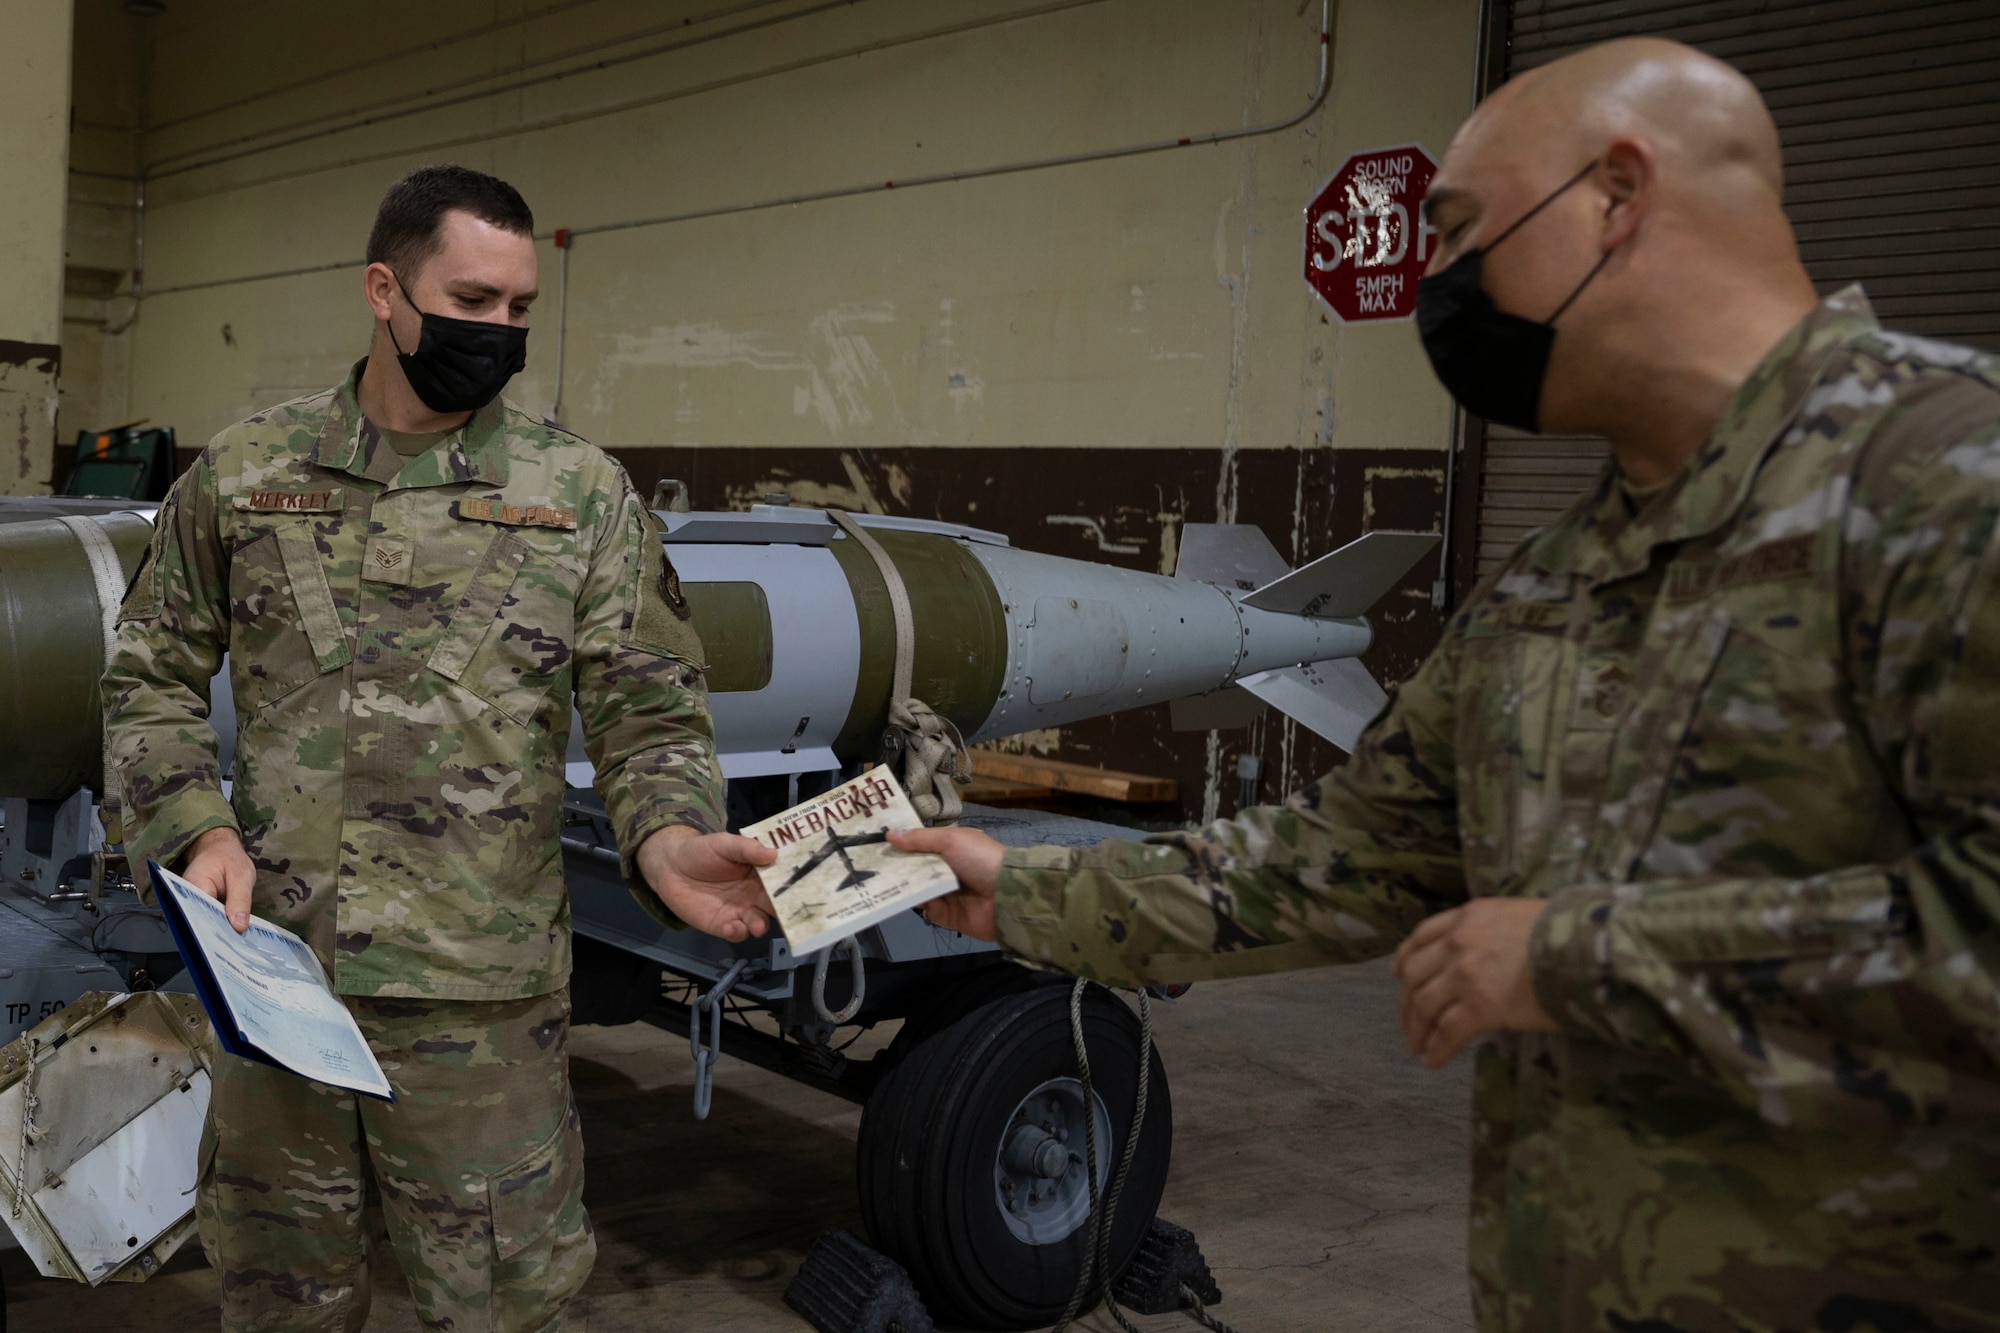 U.S. Air Force Chief Master Sgt. John Payne, 36th Wing command chief, gives Staff Sgt. Derek Merkley, Munitions Support Equipment Management crew chief with the 36th Munitions Squadron, a book about the history of Operation Linebacker II at Andersen Air Force Base, Guam, Jan. 12, 2022.